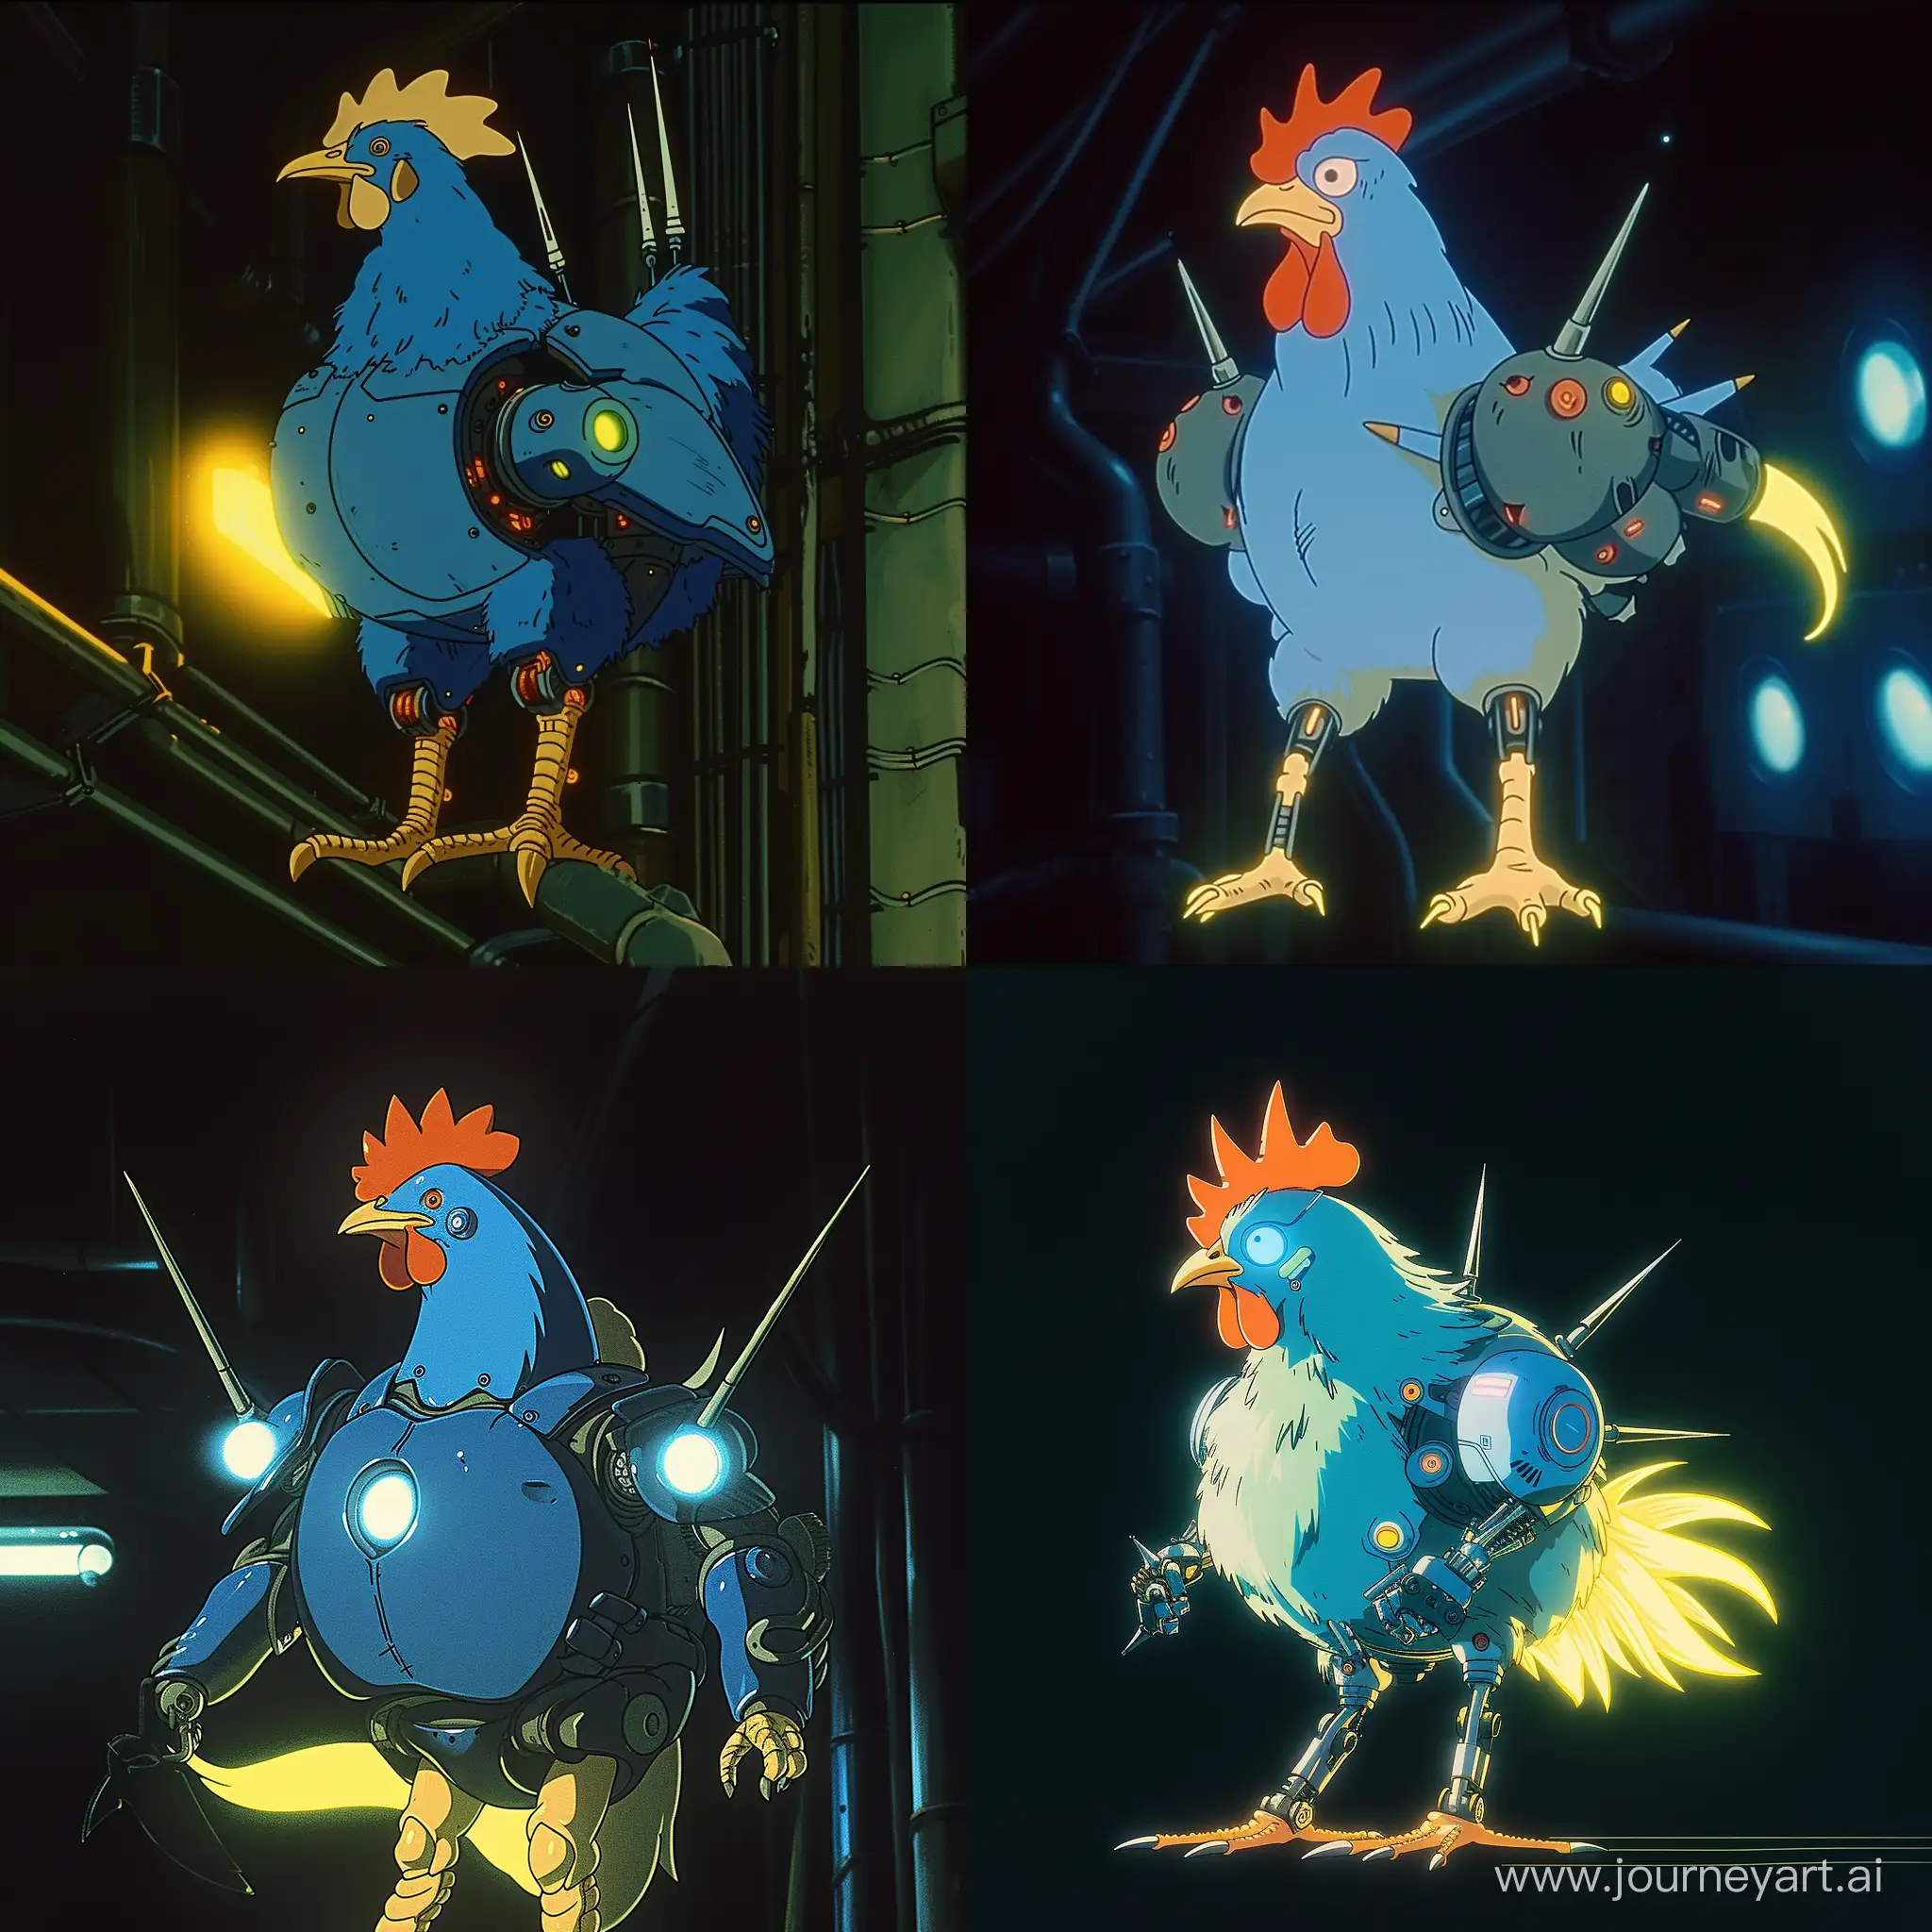 1990s anime still, style of Studio Ghibli by Hayao Miyazaki　A cartoon-style cyborg chicken with one spike sticking out from both shoulders.The head is blue and the tail is glowing yellow